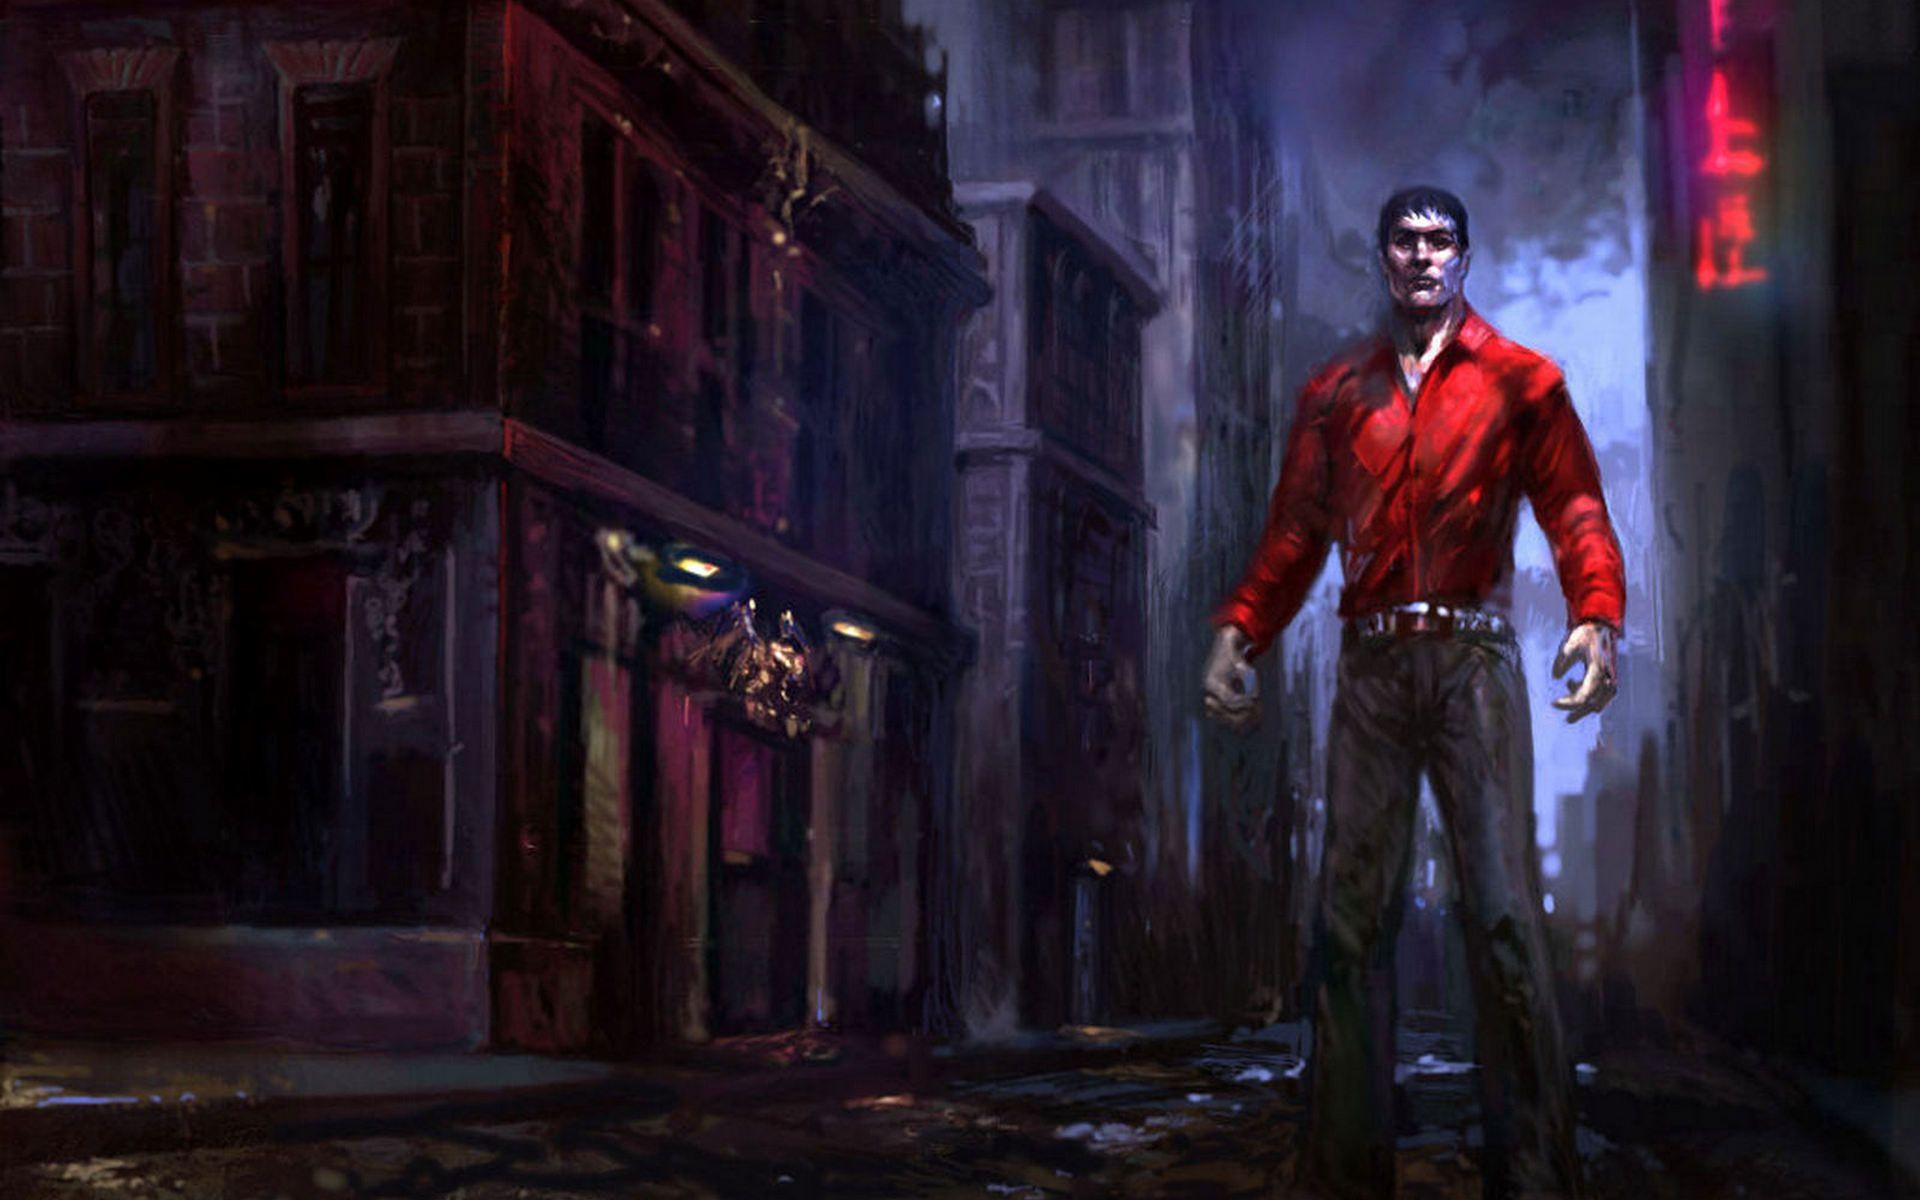 Vampire: The Masquerade – Bloodlines wallpaper - Game wallpapers